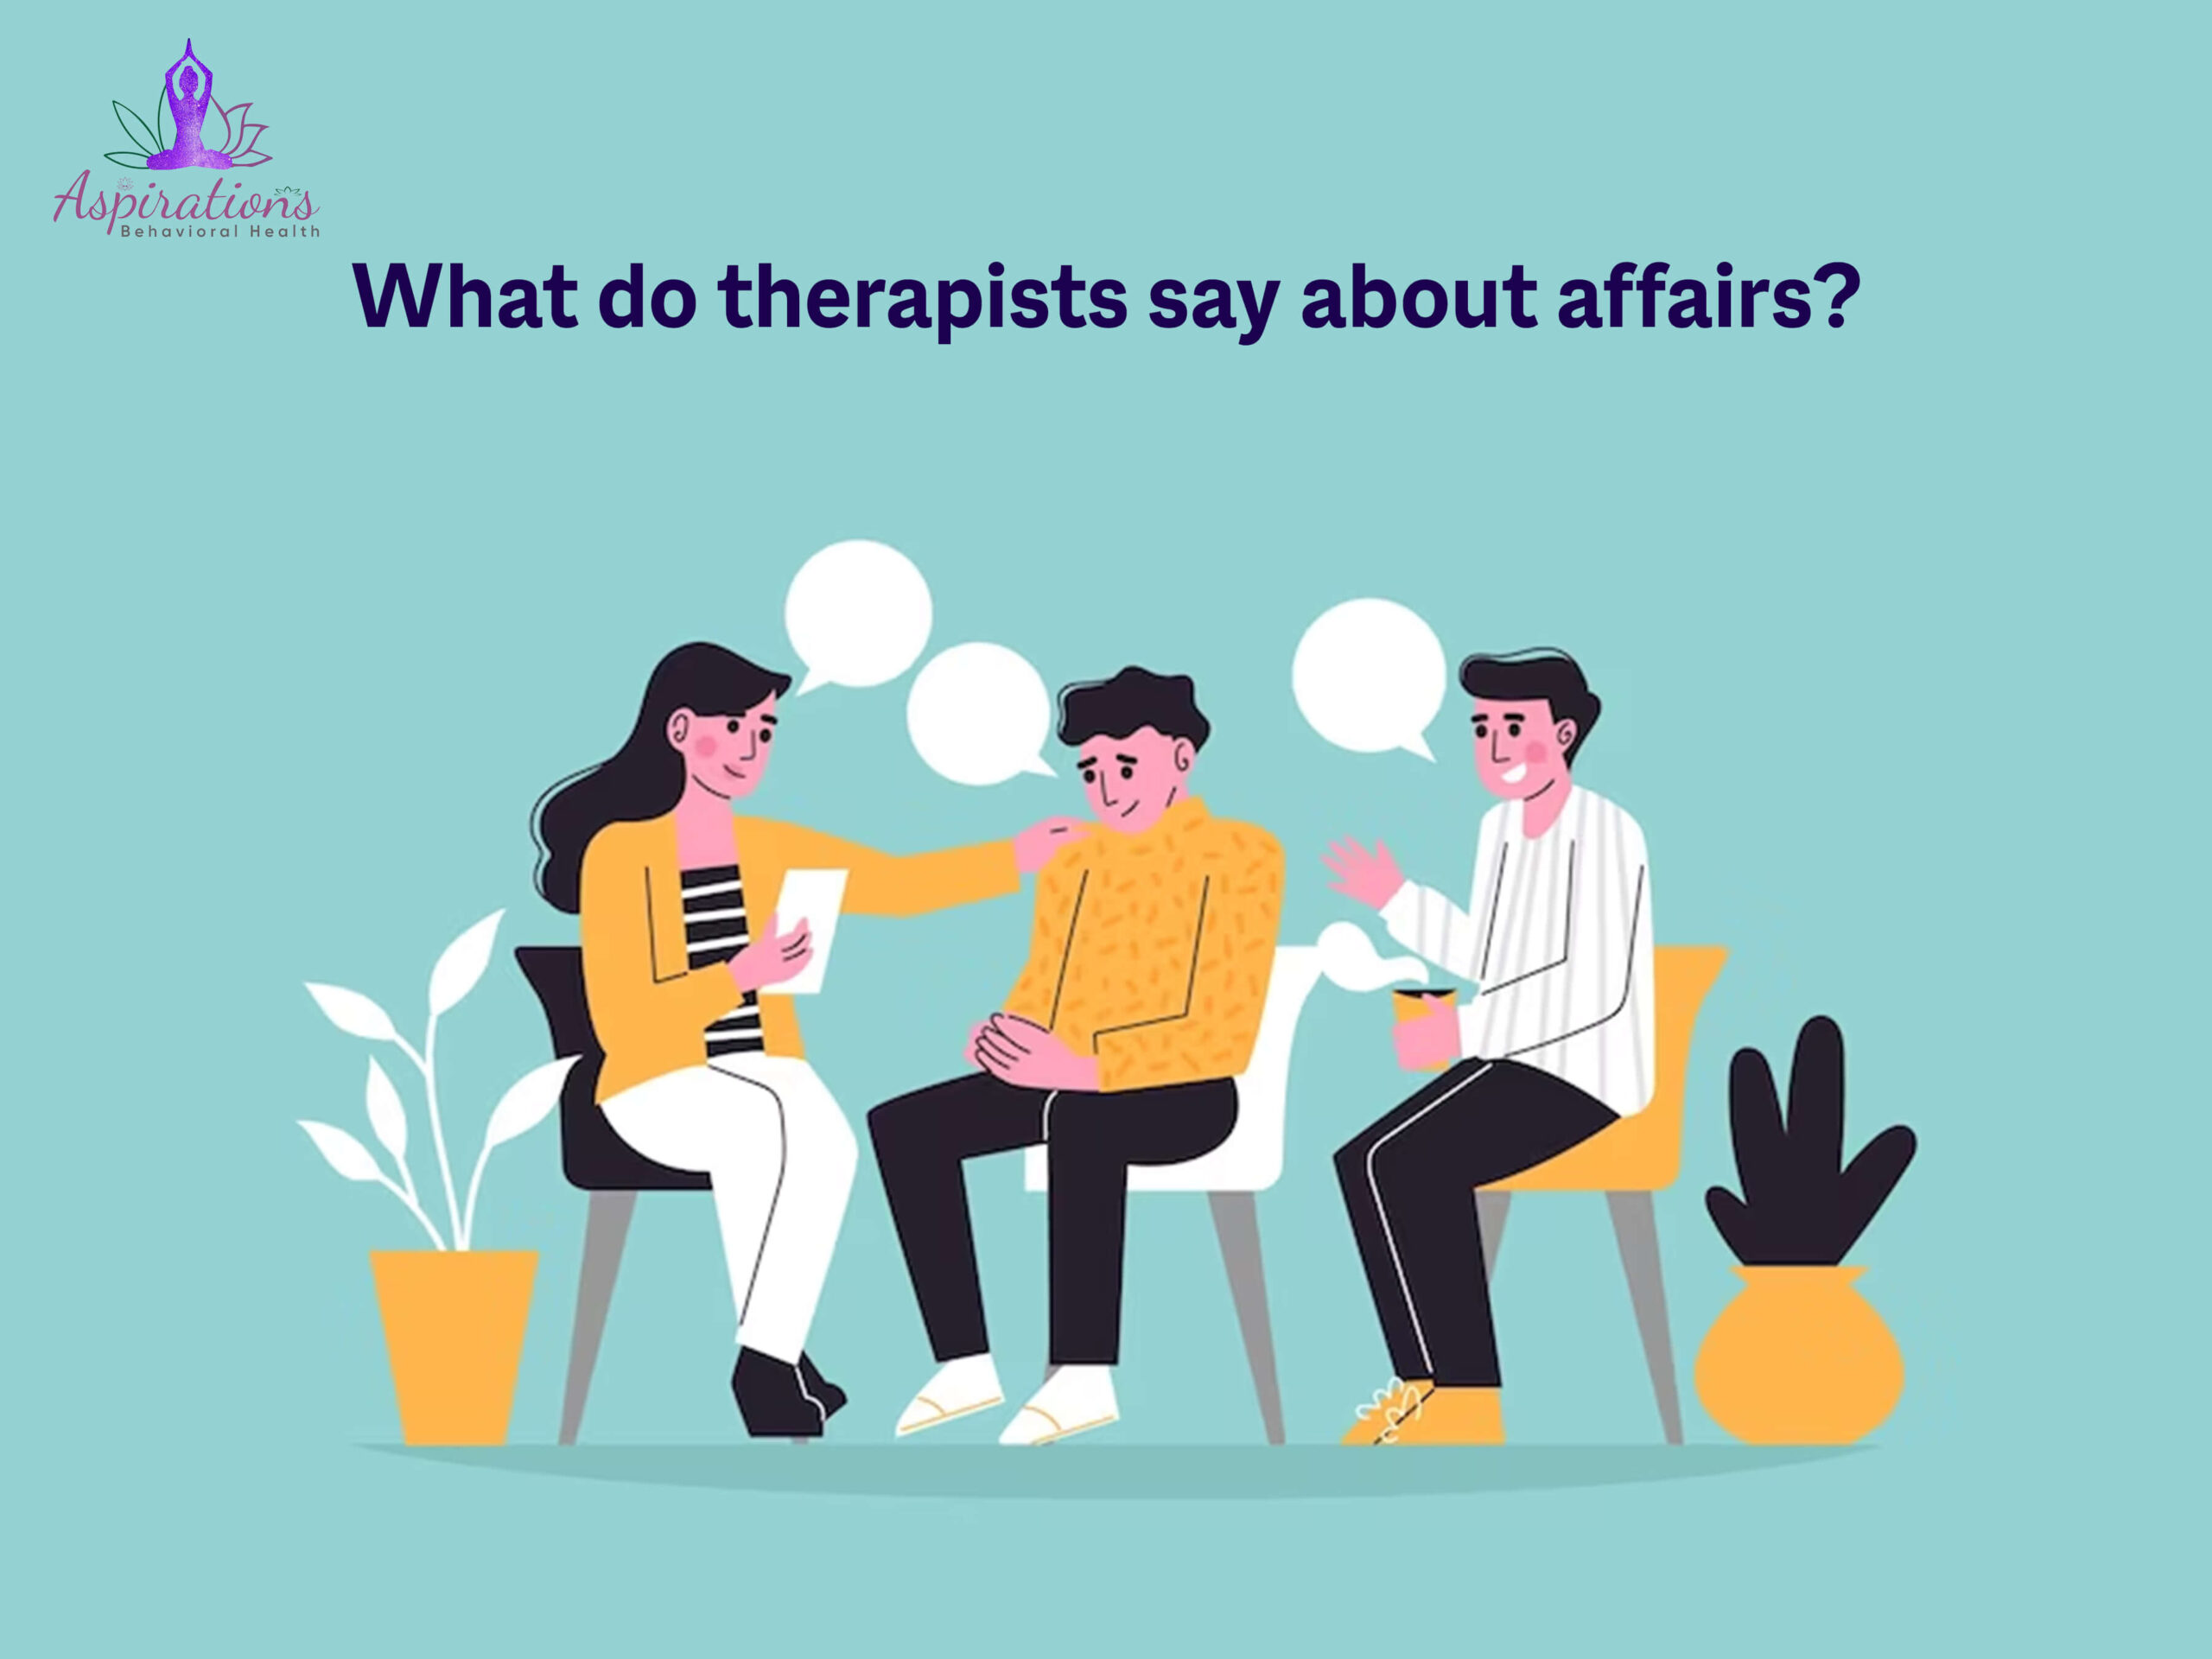 What do therapists say about affairs?